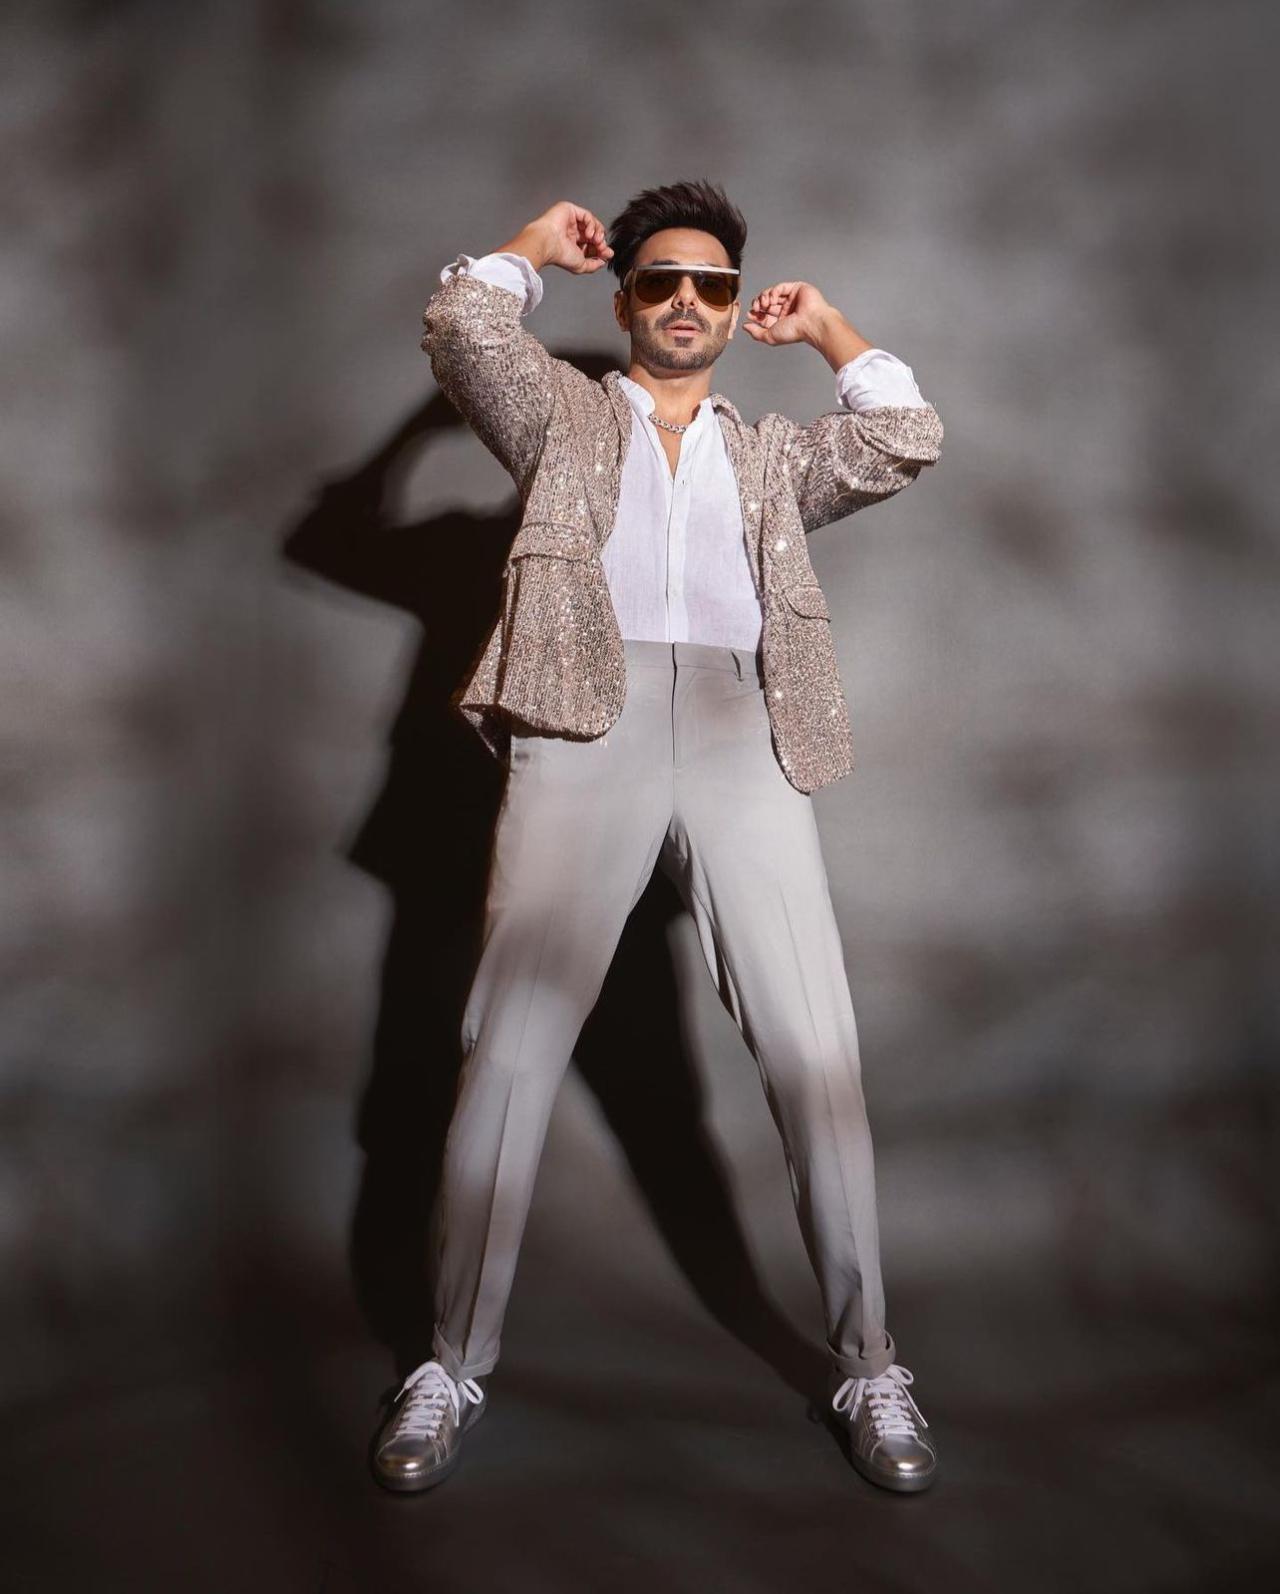 Ranveer Singh, pioneer of eccentric clothing, also knows how to carry  elegant suits